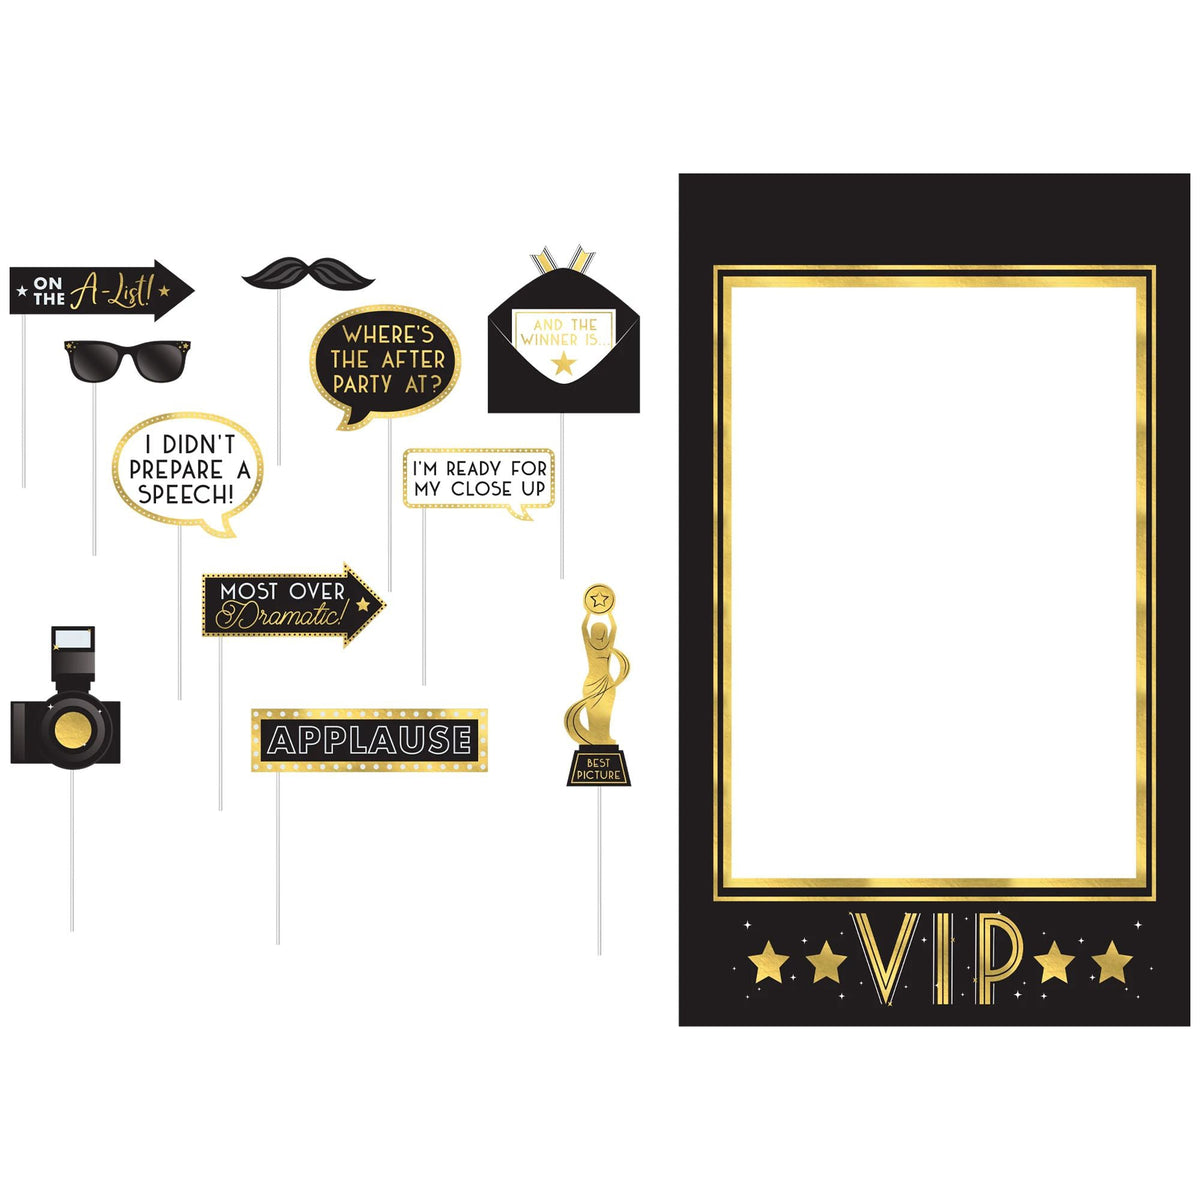 AMSCAN CA Theme Party Awards Night Frame Photobooth Props, 1 Count